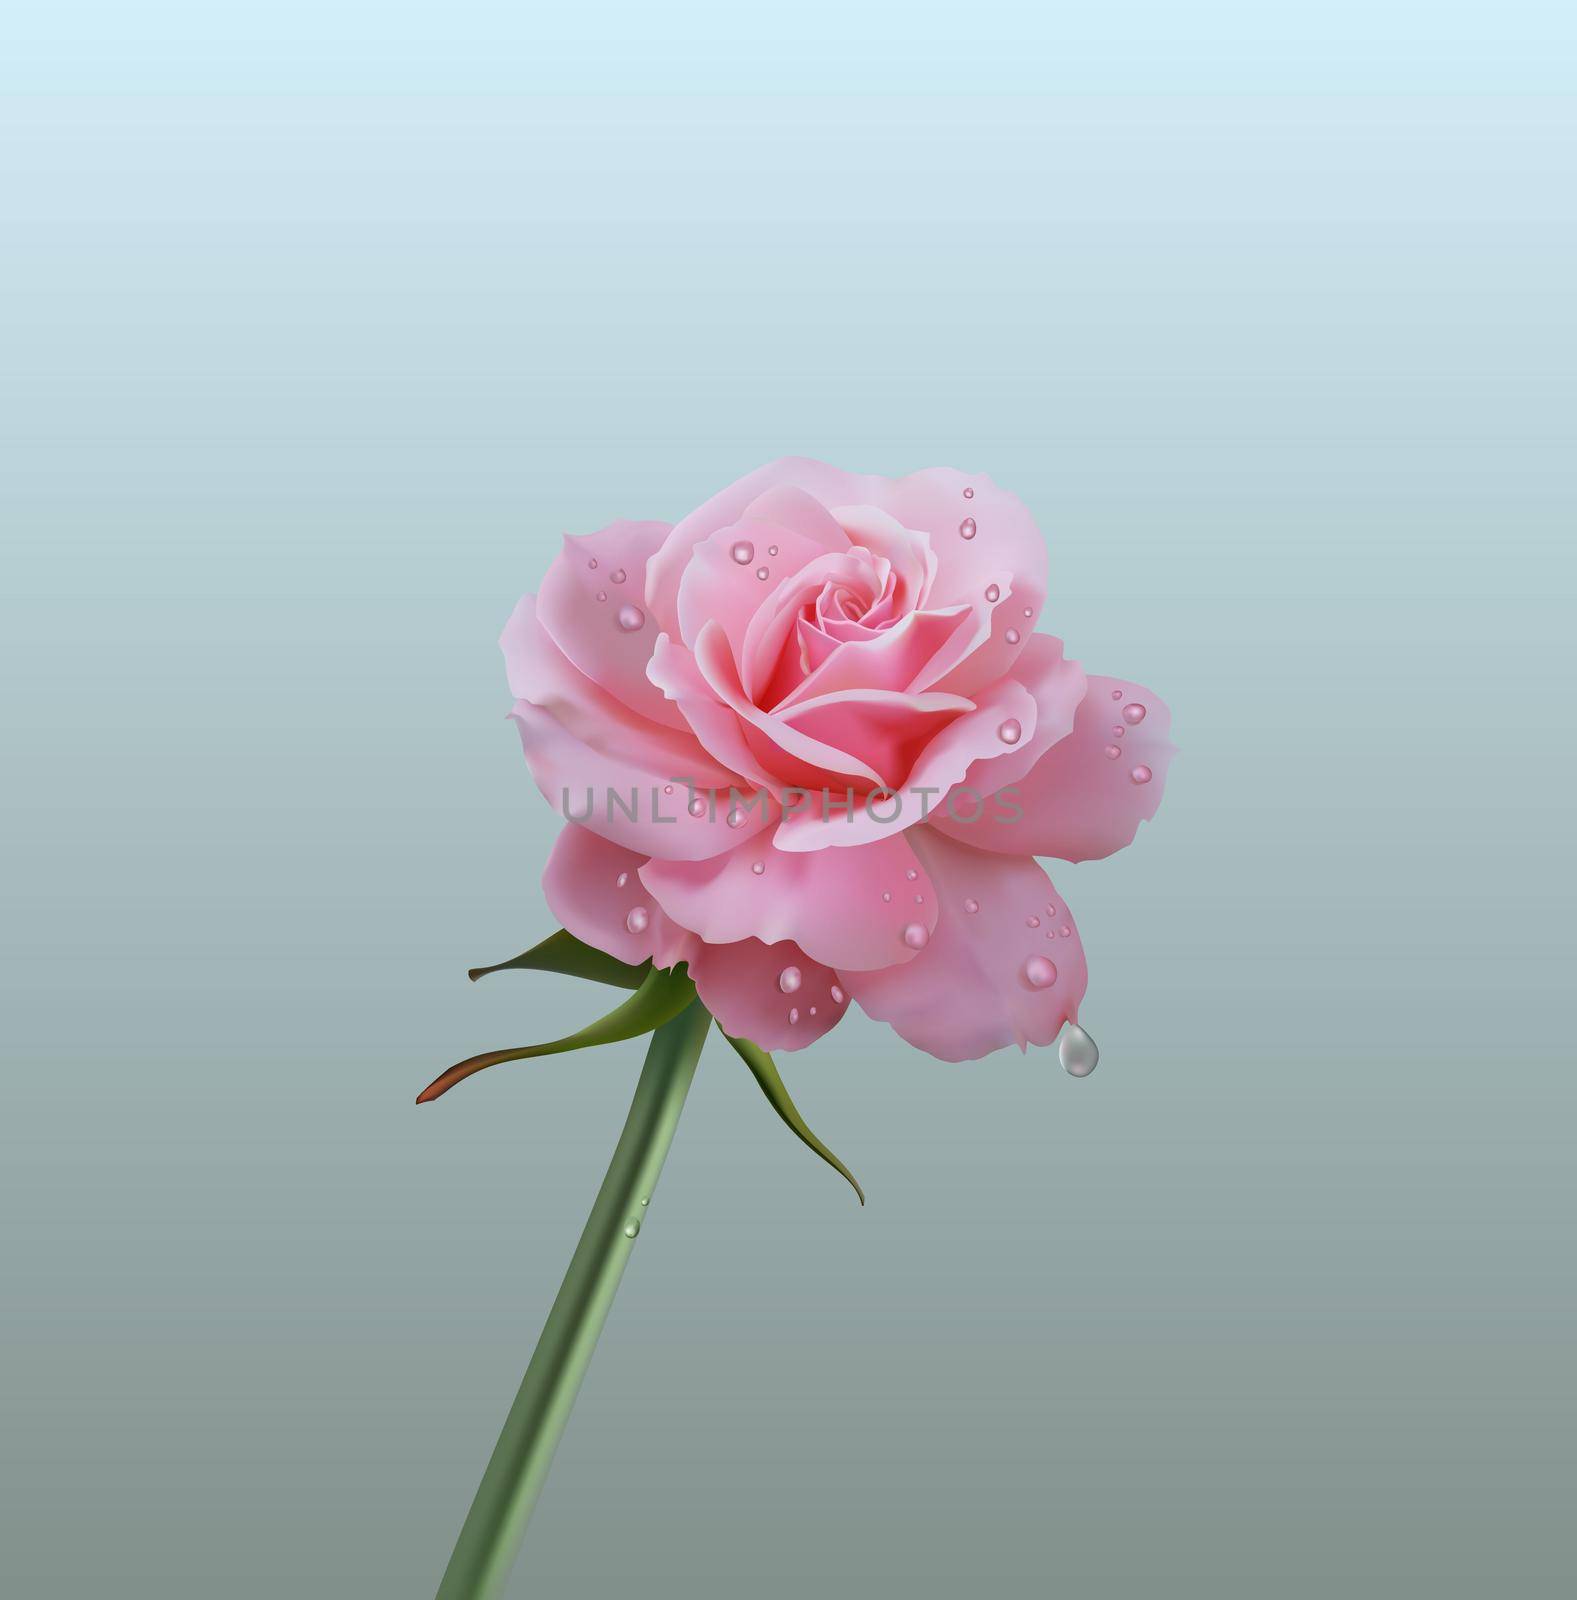 Realistic pink rose on white background